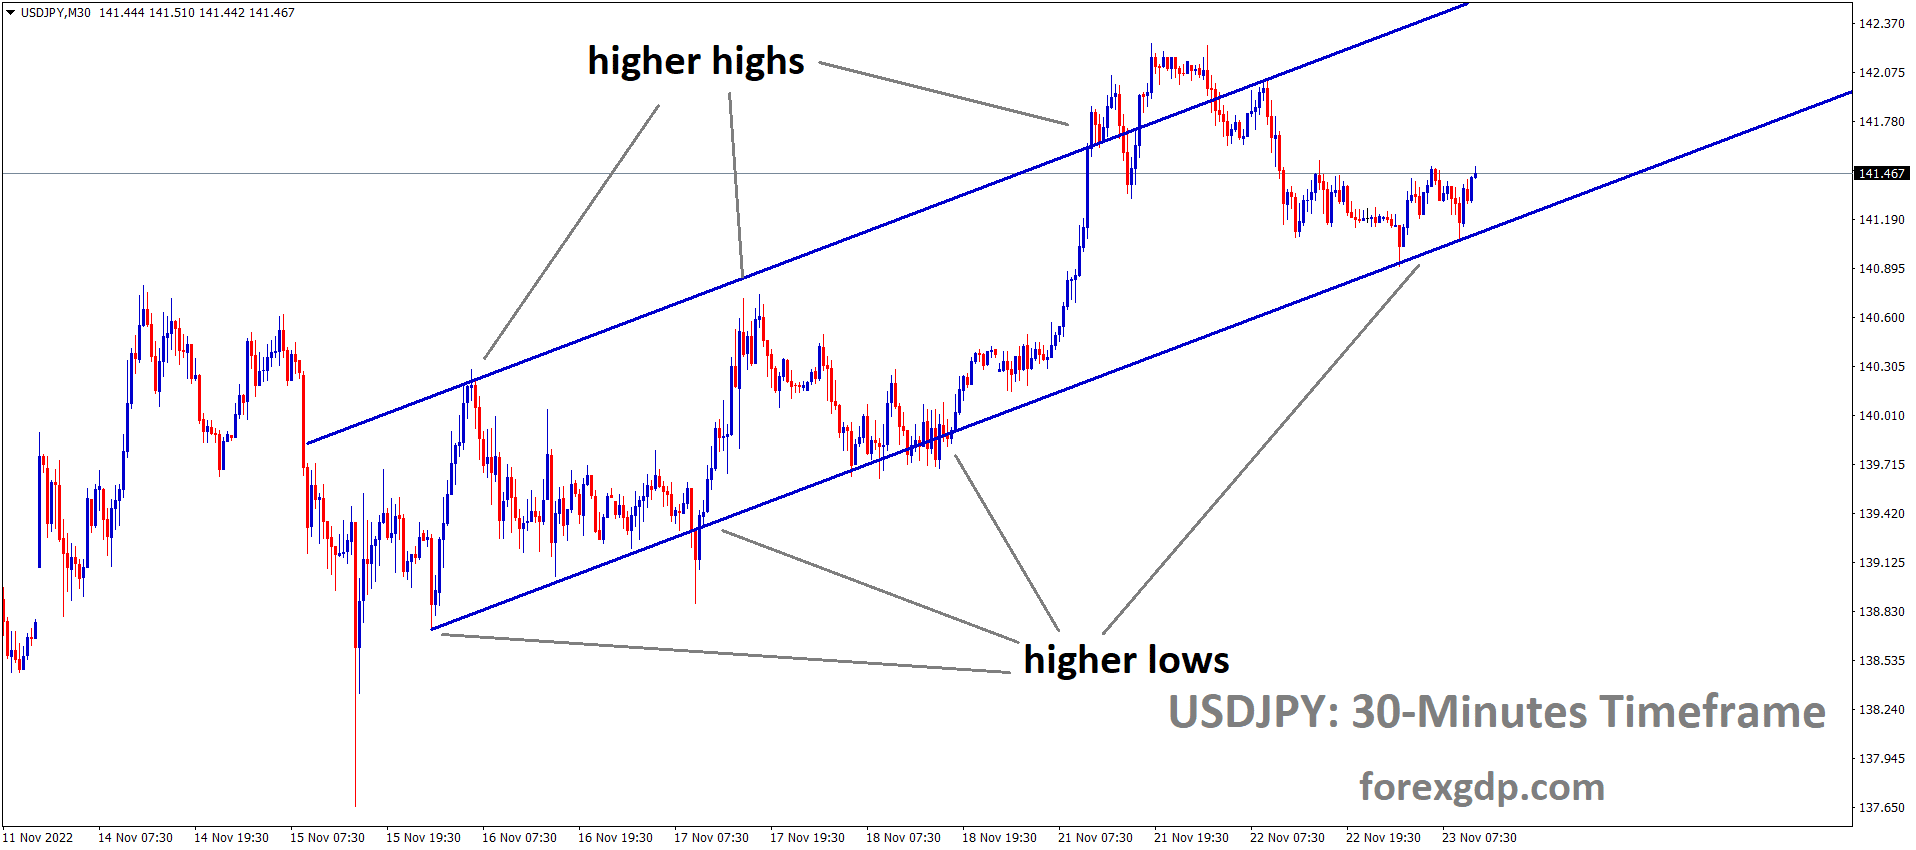 USDJPY is moving in an ascending channel and the market has rebounded from the higher low area of the channel